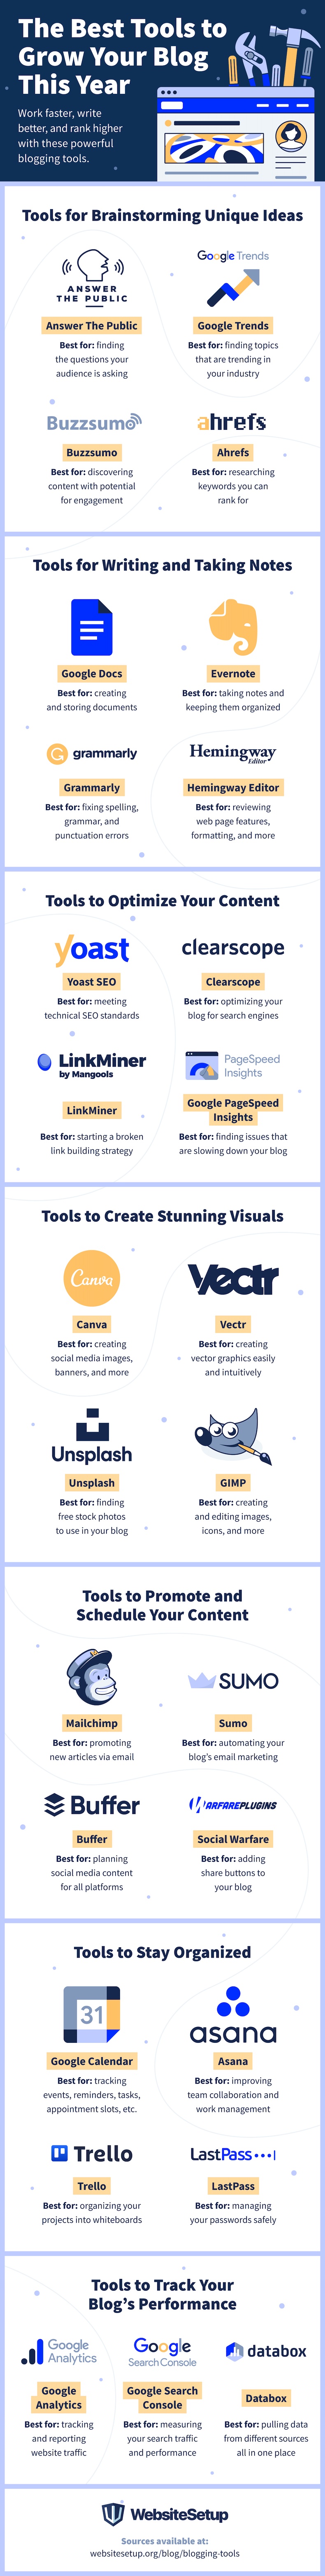 Tools to manage and grow your blog infographic